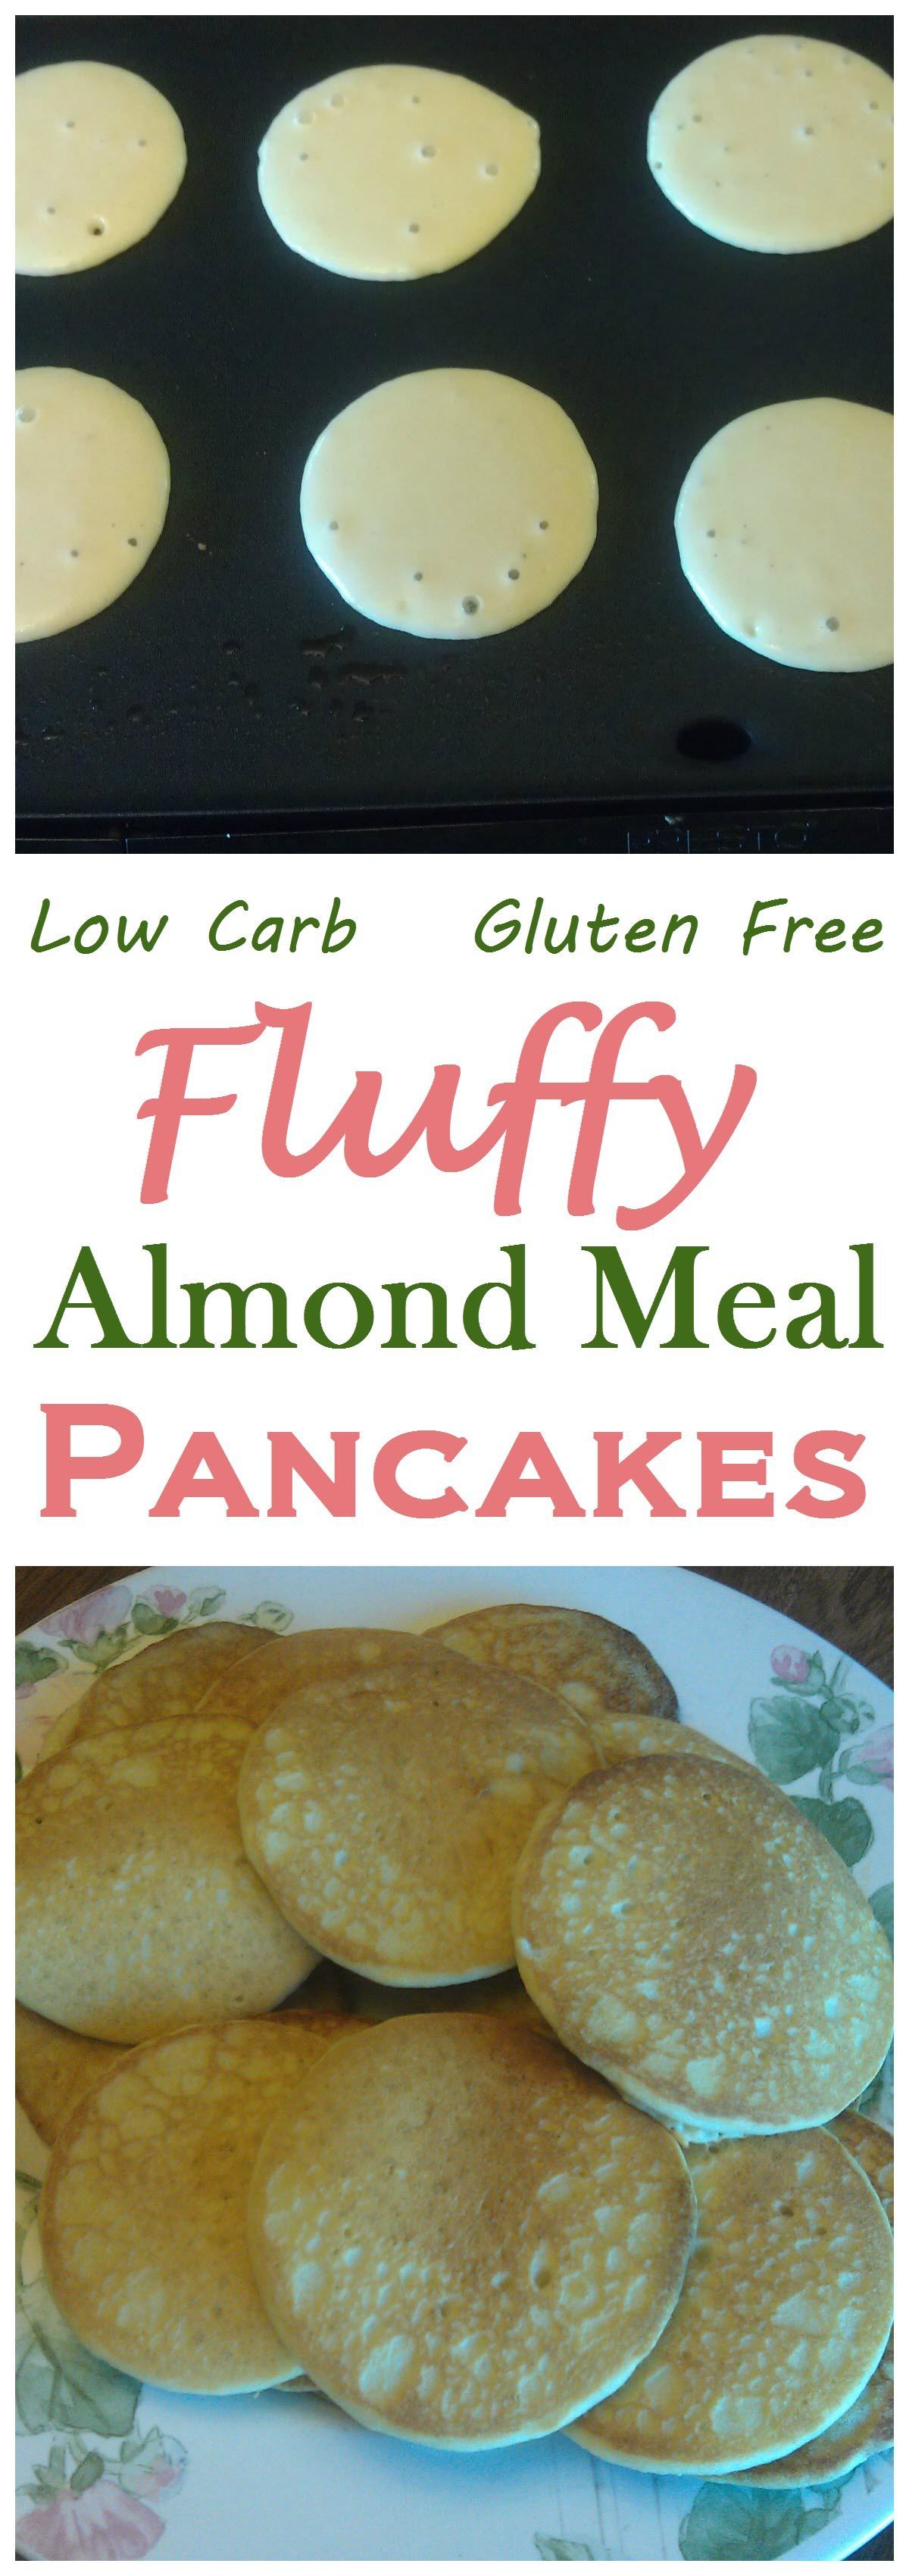 A classic low carb and gluten free pancakes. Can be made ahead and stored in the freezer.